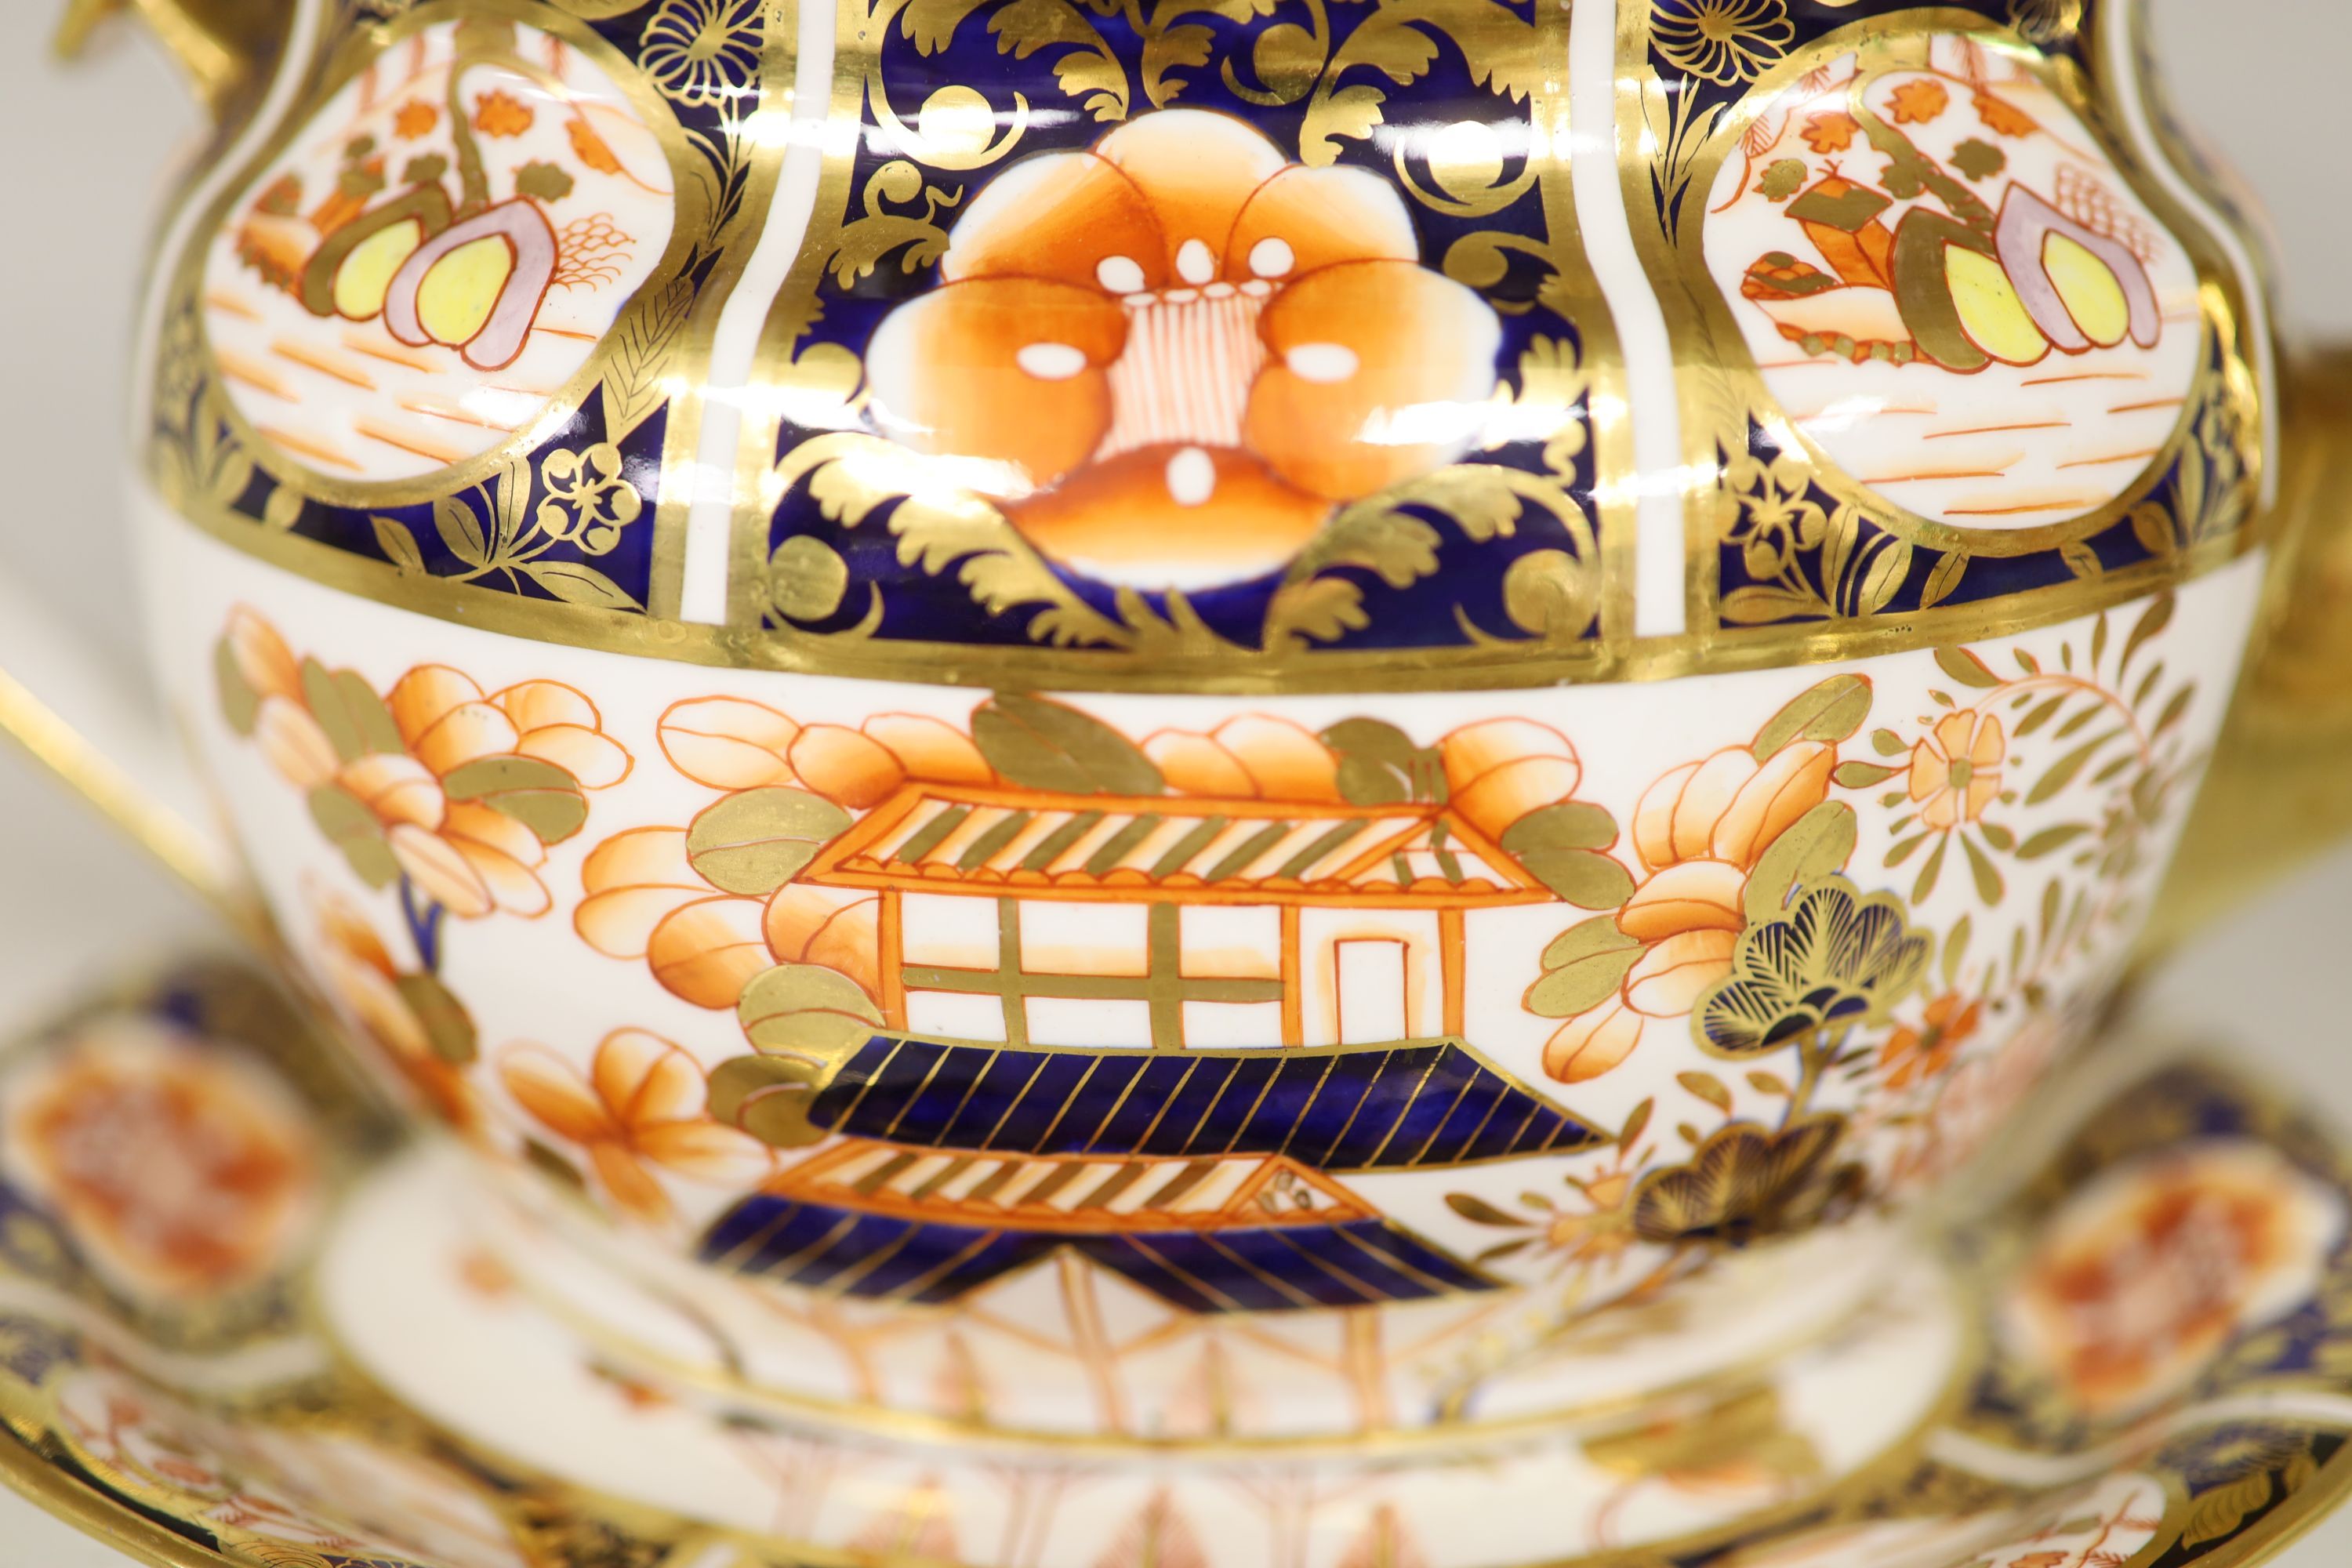 A Spode part tea service painted in imari style with pattern 1956,